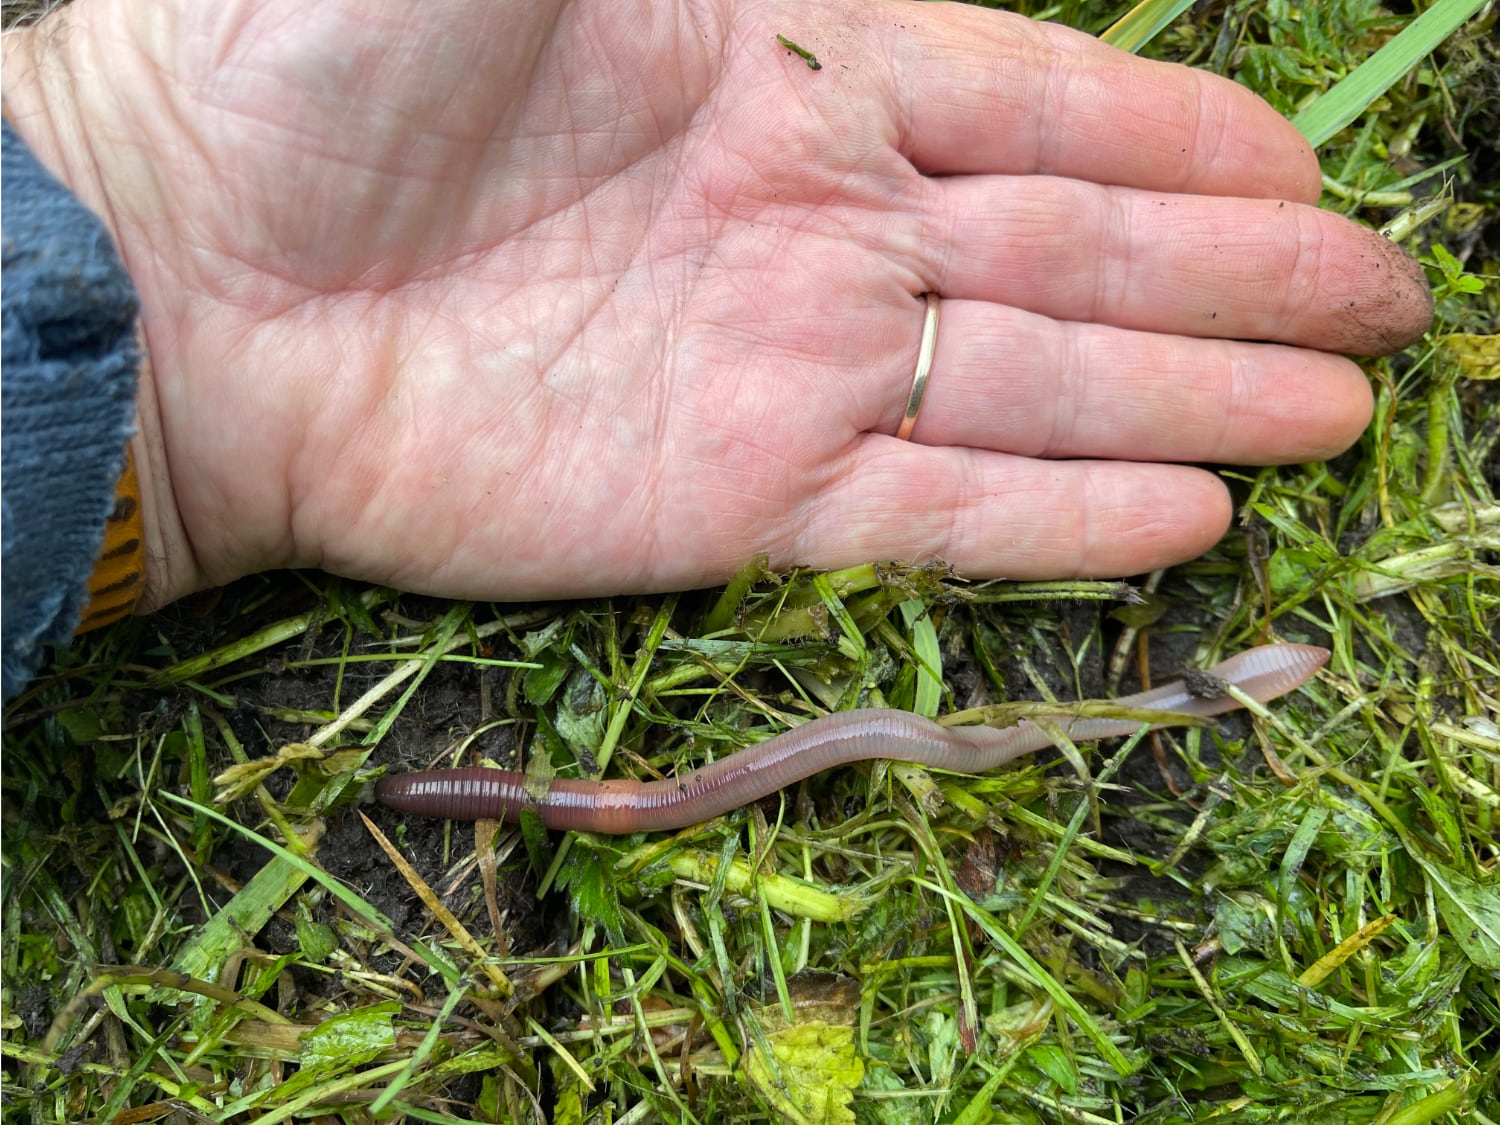 Large earthworm next to a hand.